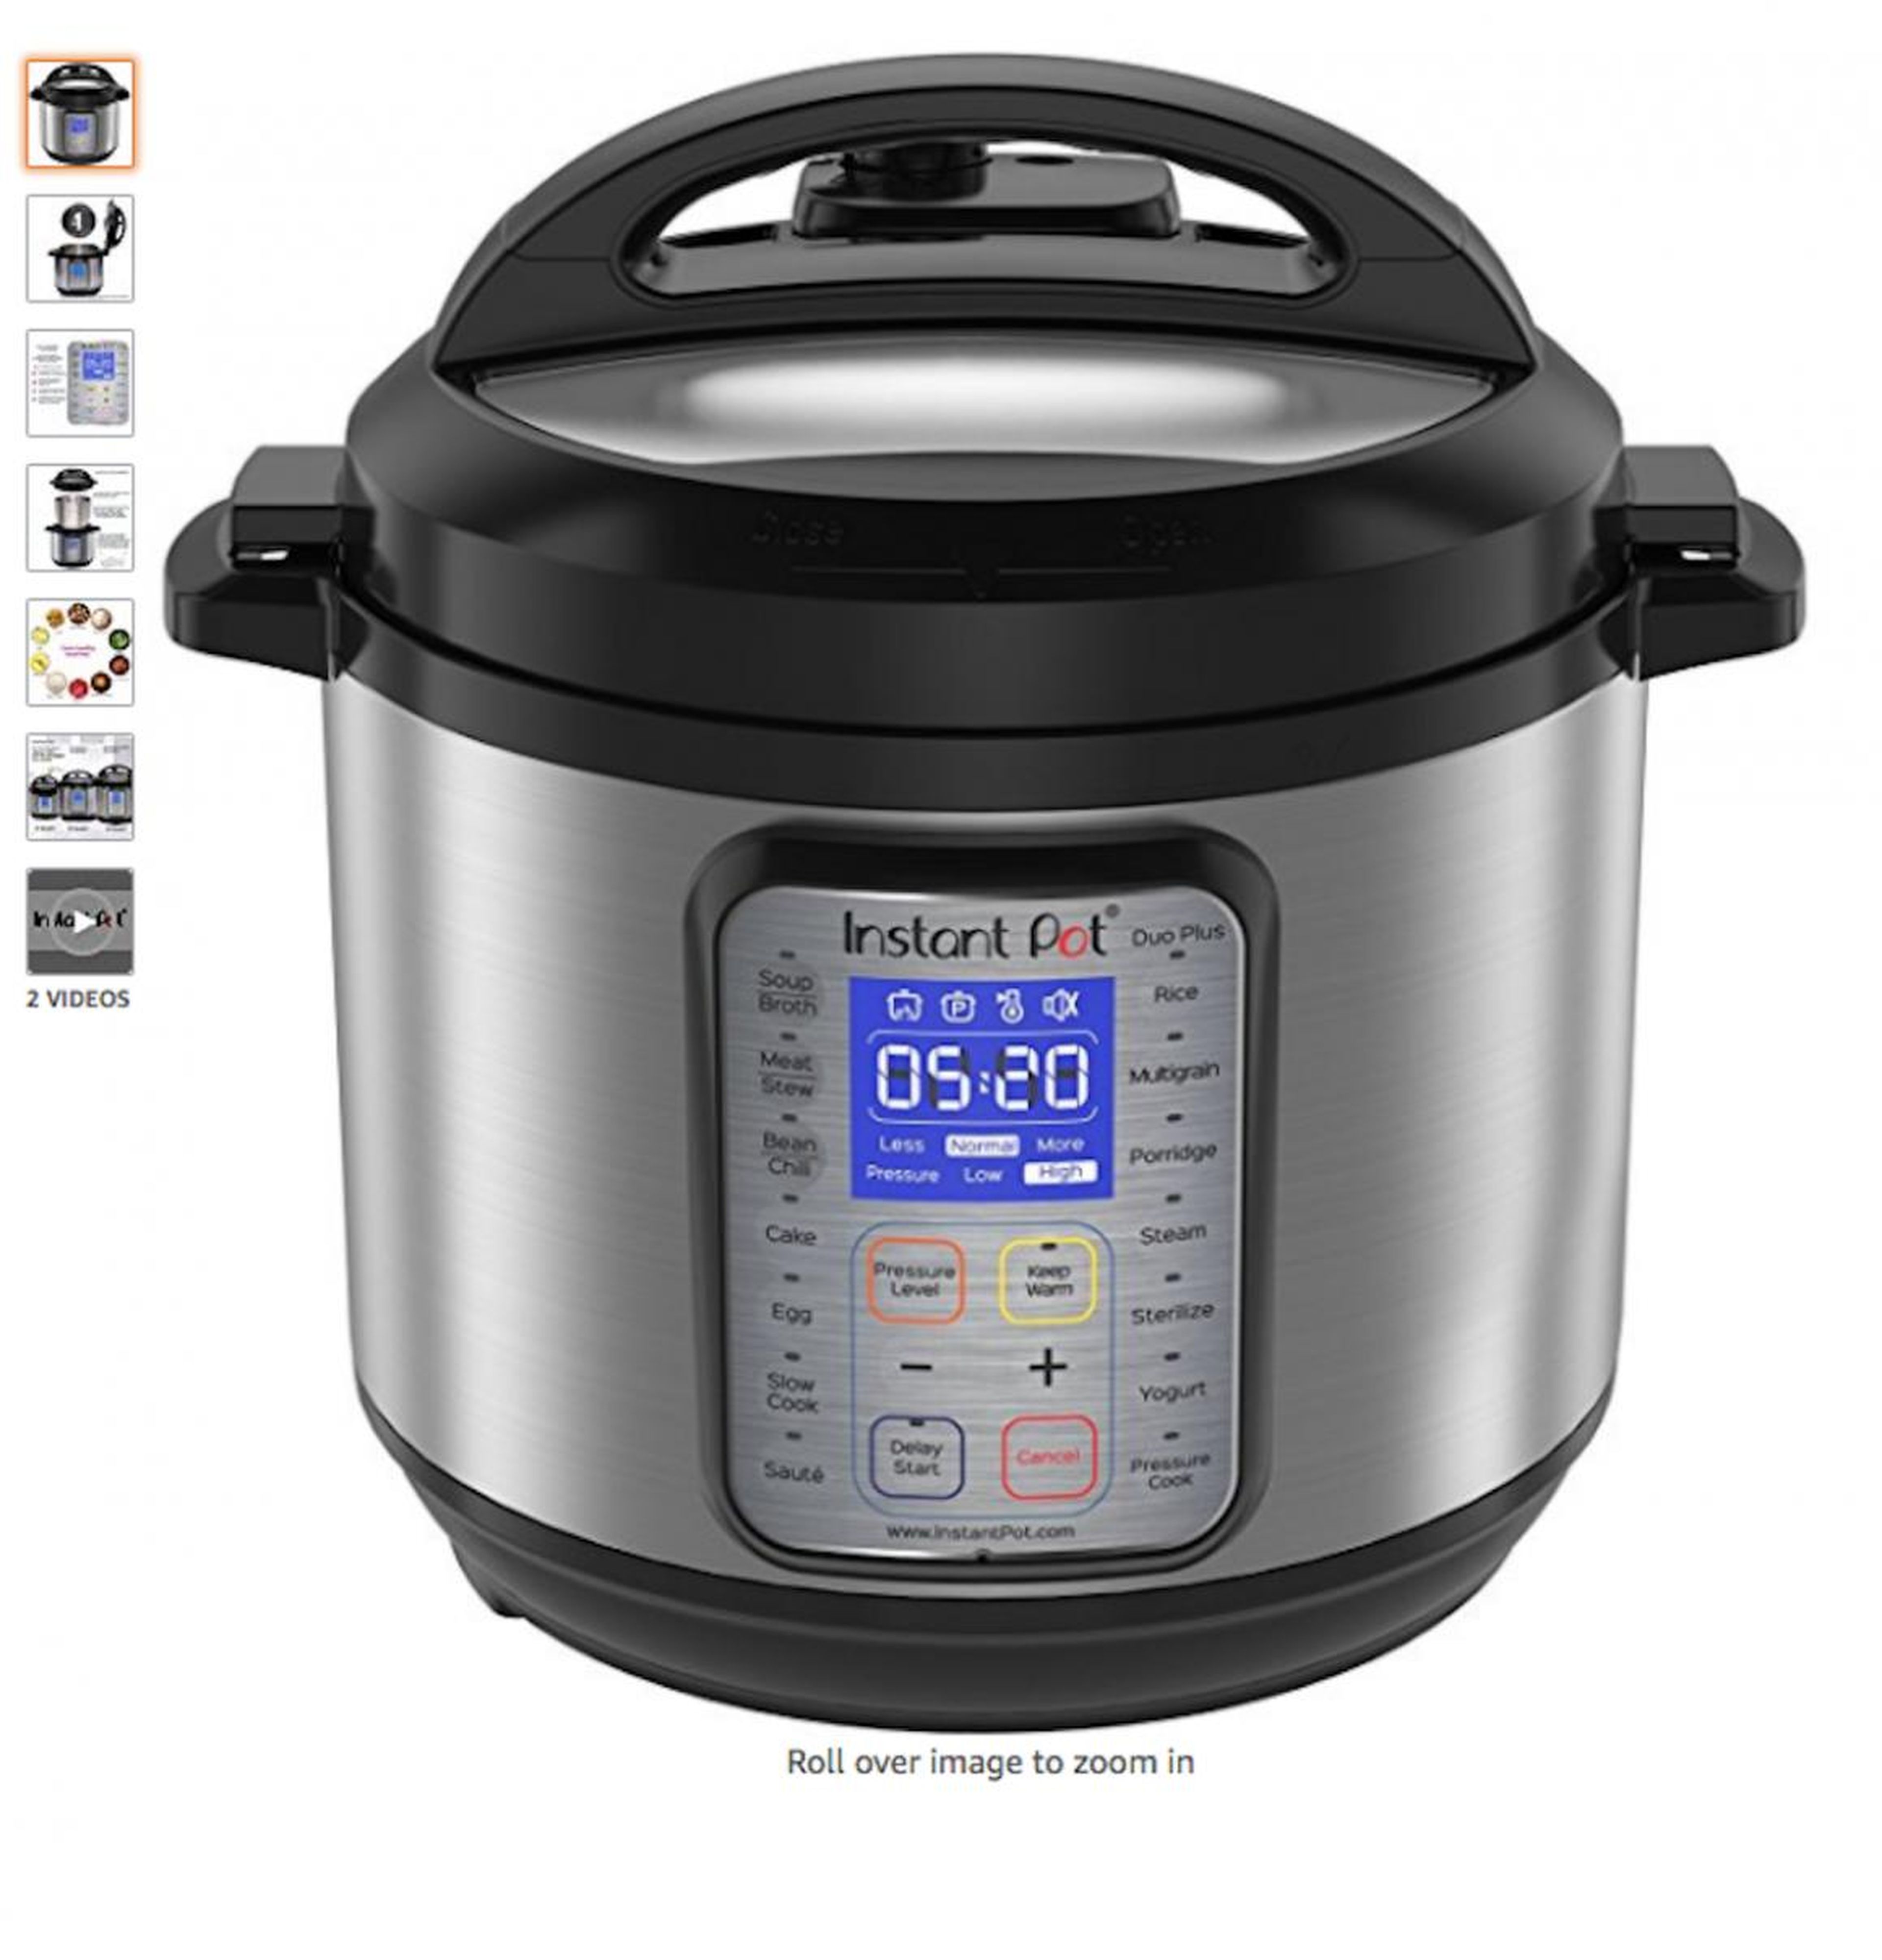 United States: In the US, the <a href="https://amzn.to/2L6VAYo">Instant Pot 6 Qt 7-in-1 Multi Use</a> was a top seller, with 300,000 purchased.